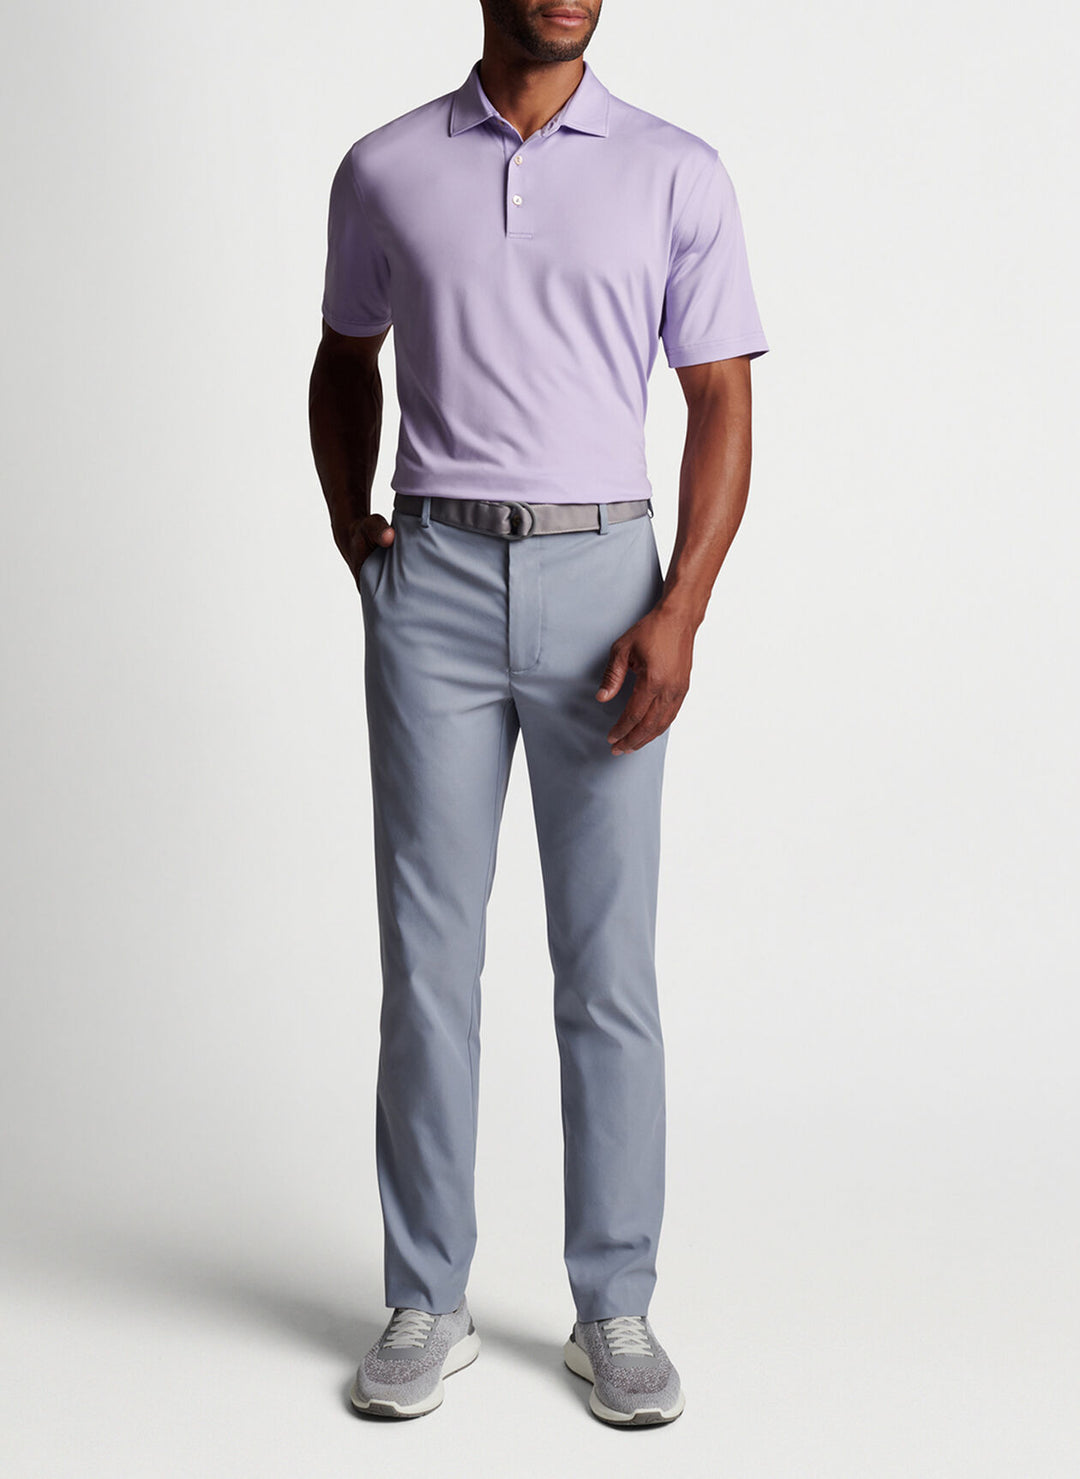 Peter Millar Mens Solid Performance Jersey Polo - MOONFLOWER - Golf Anything Canada